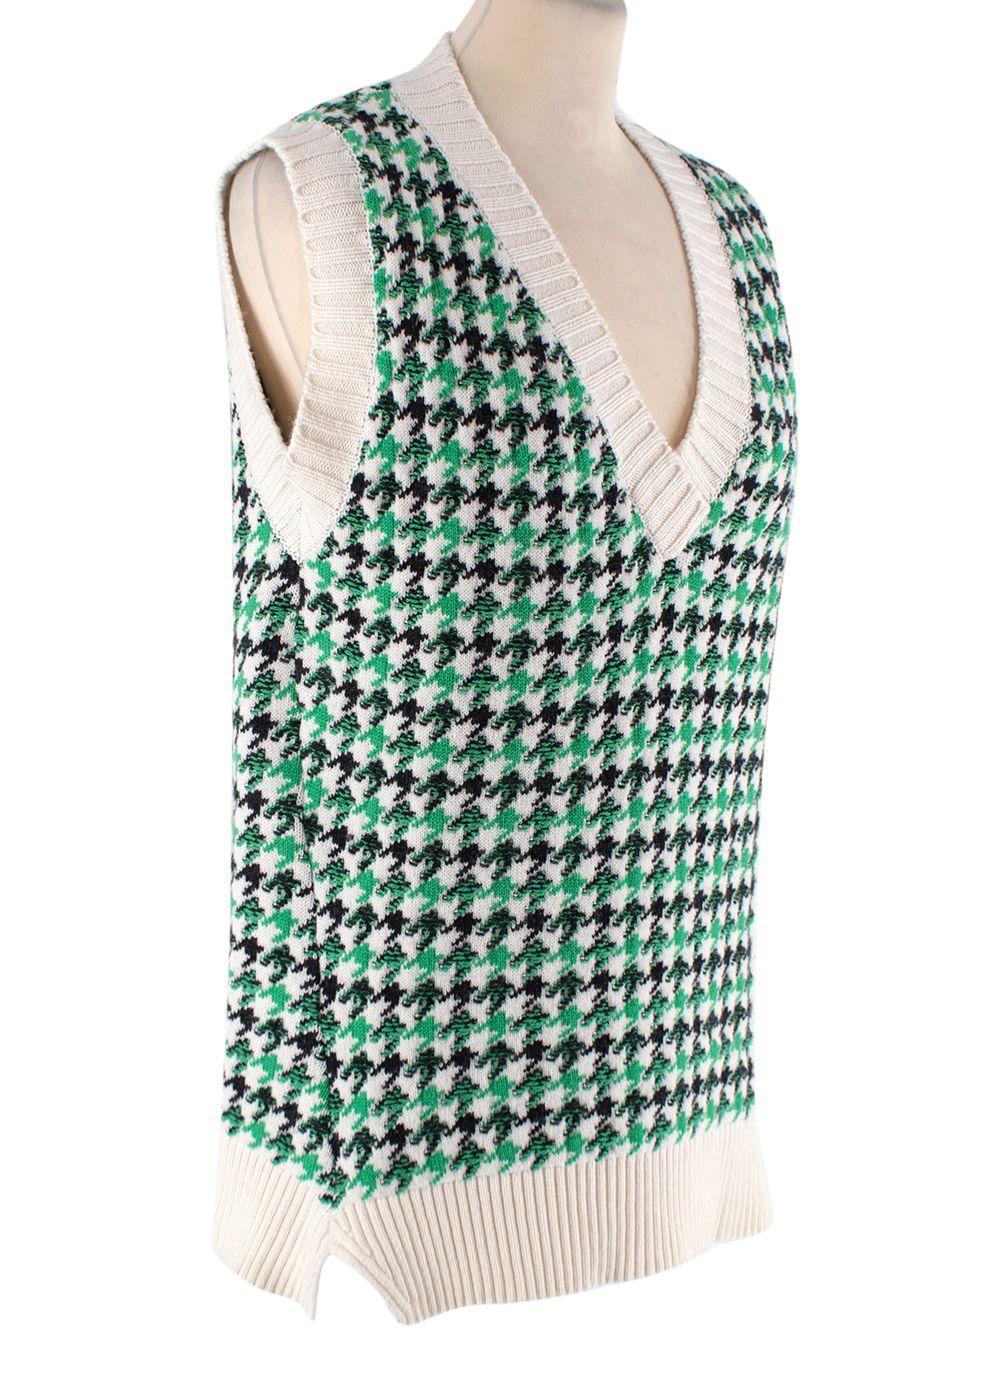 Barrie Green, Black & White Houndstooth Top & Trousers

- Quirky cashmere-blend 2 piece in grass green, cream, and black Houndstooth check
- Deep V-neck knitted vest with contrast ribbed cream neckline, armhole, and hem
- Zip fly, unlined